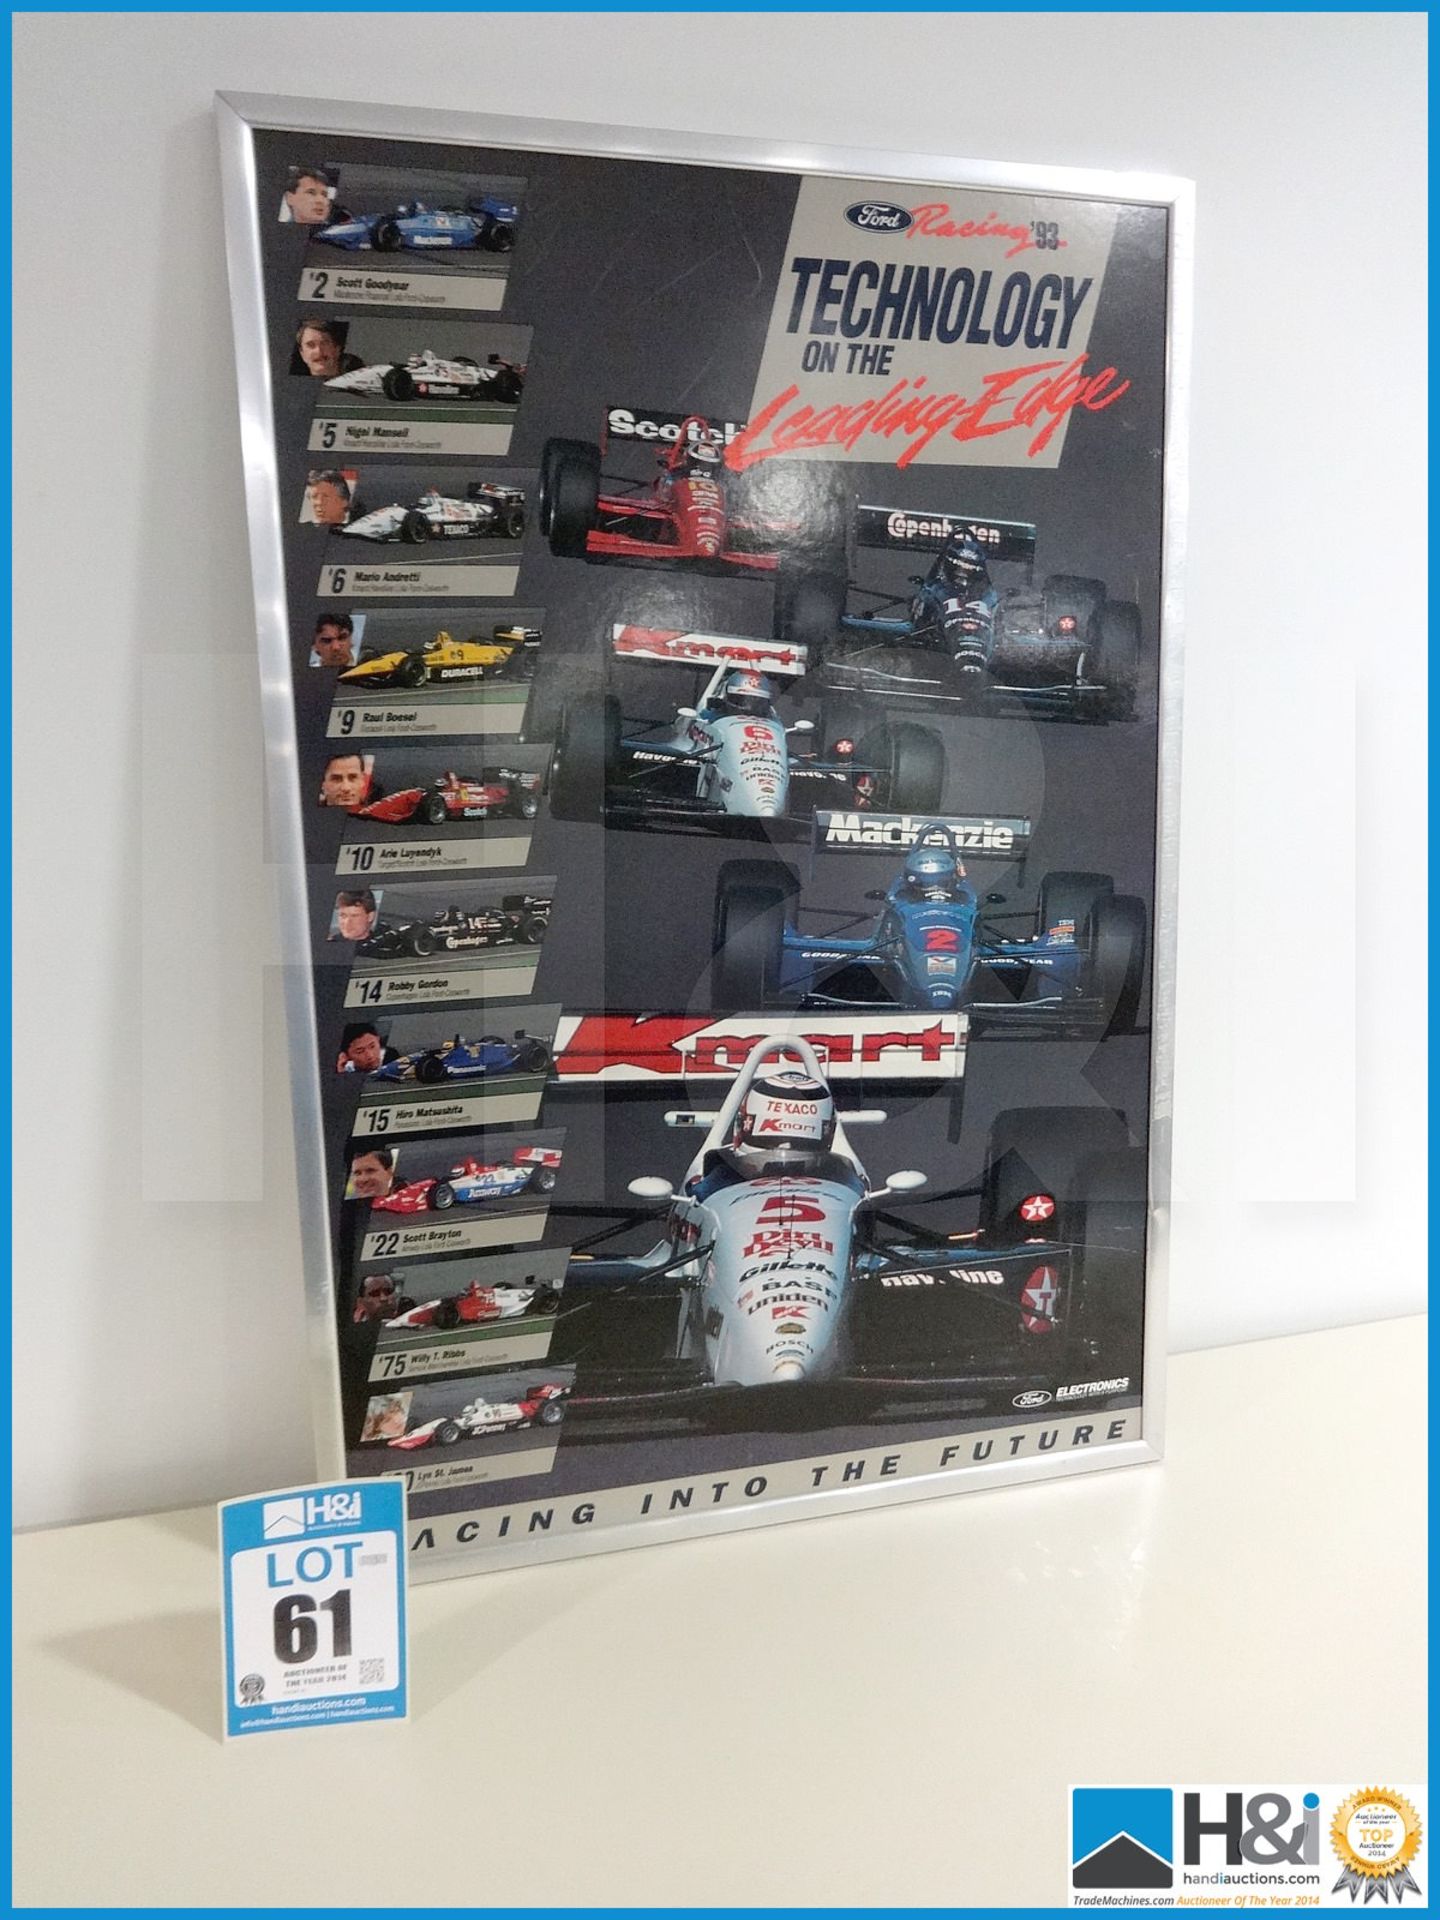 Framed Ford 'Racing Into The Future - technology on the Cutting Edge' 1993 year. Features Andretti,